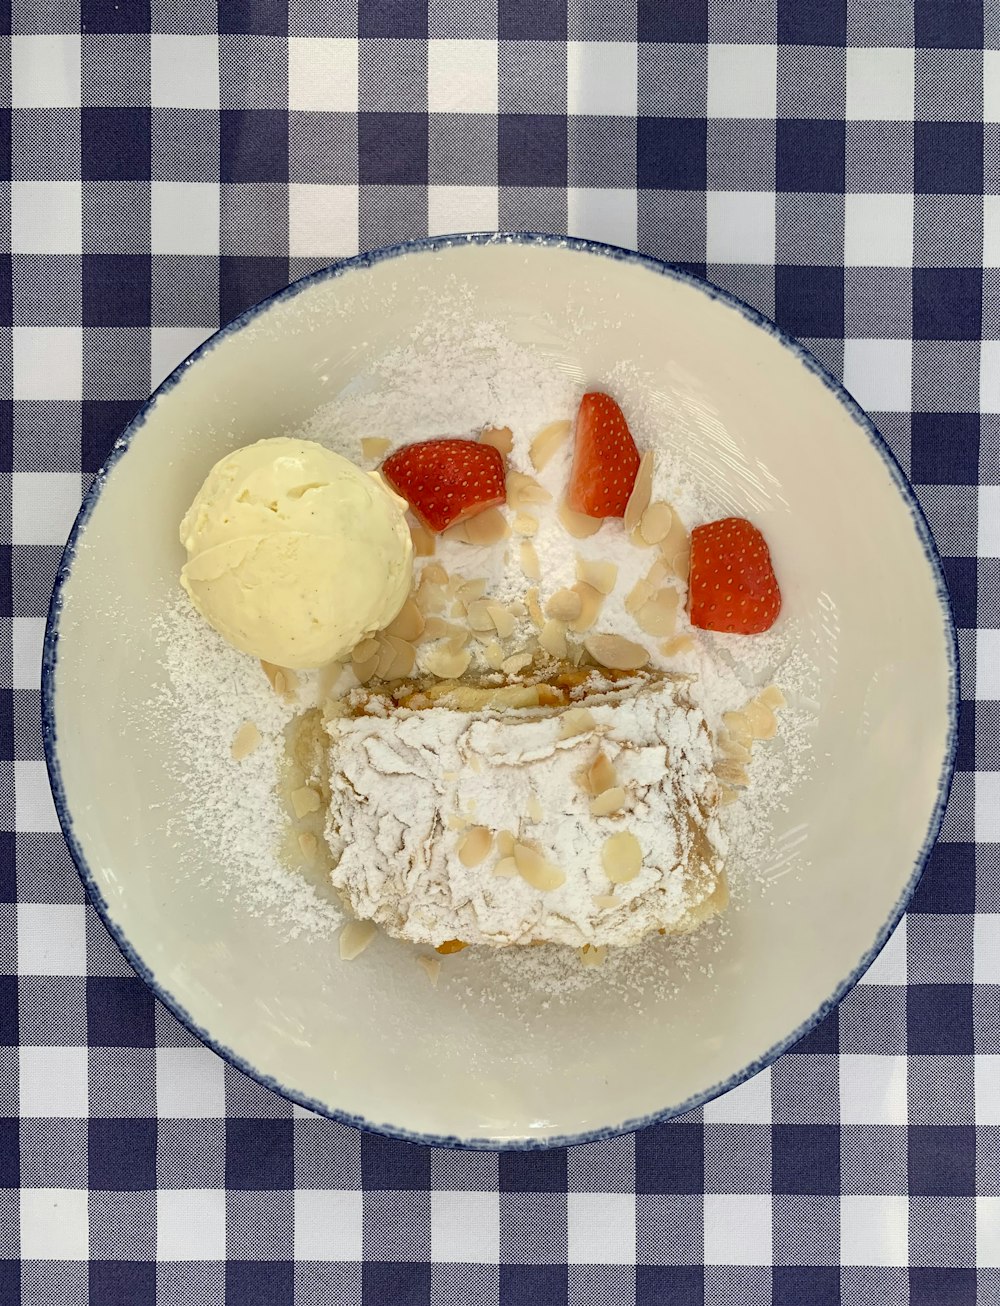 a white plate topped with a desert and a scoop of ice cream